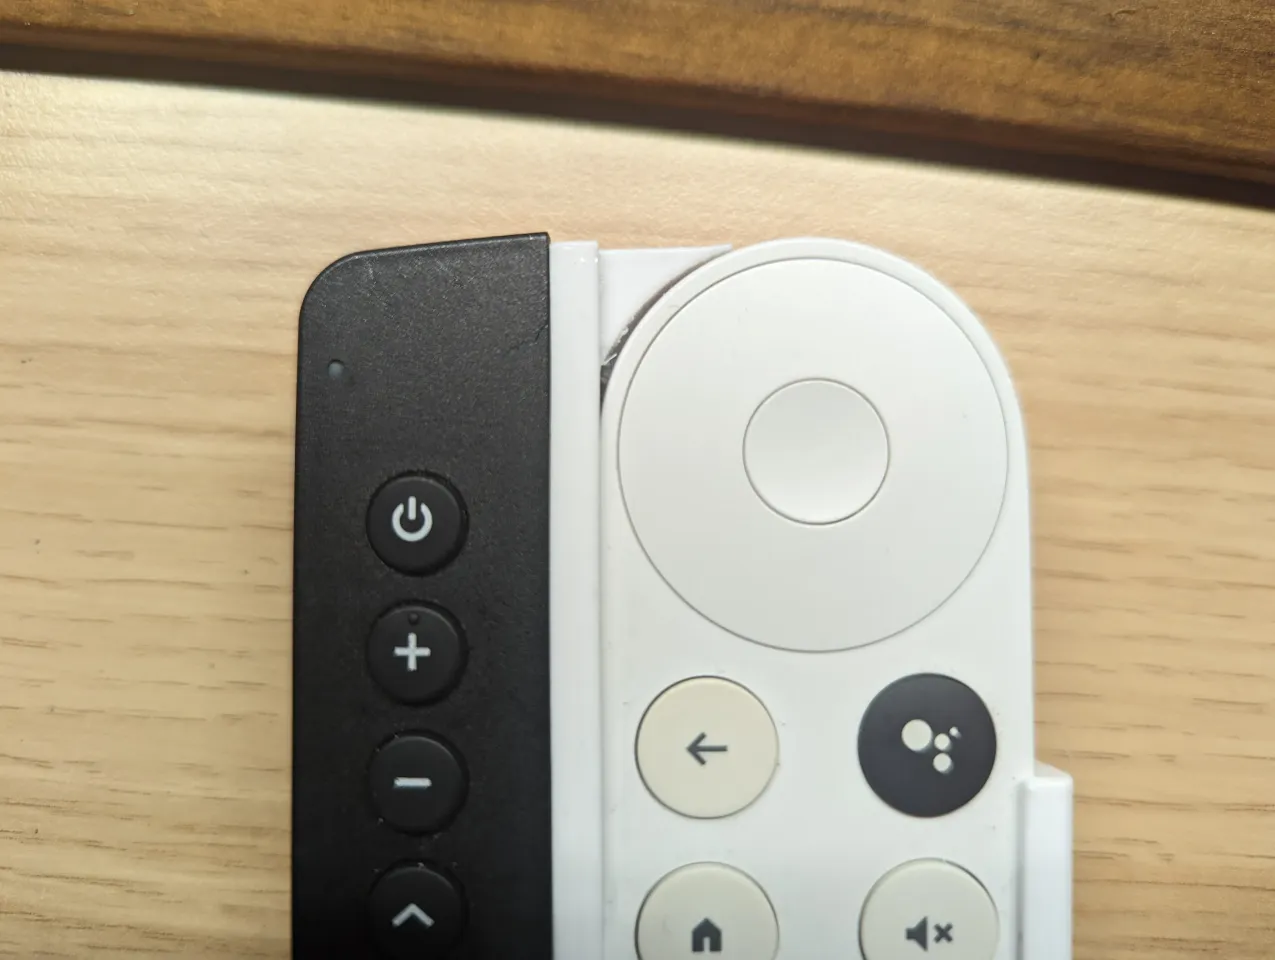 Sideclick Universal Remote Attachment for Chromecast with Google